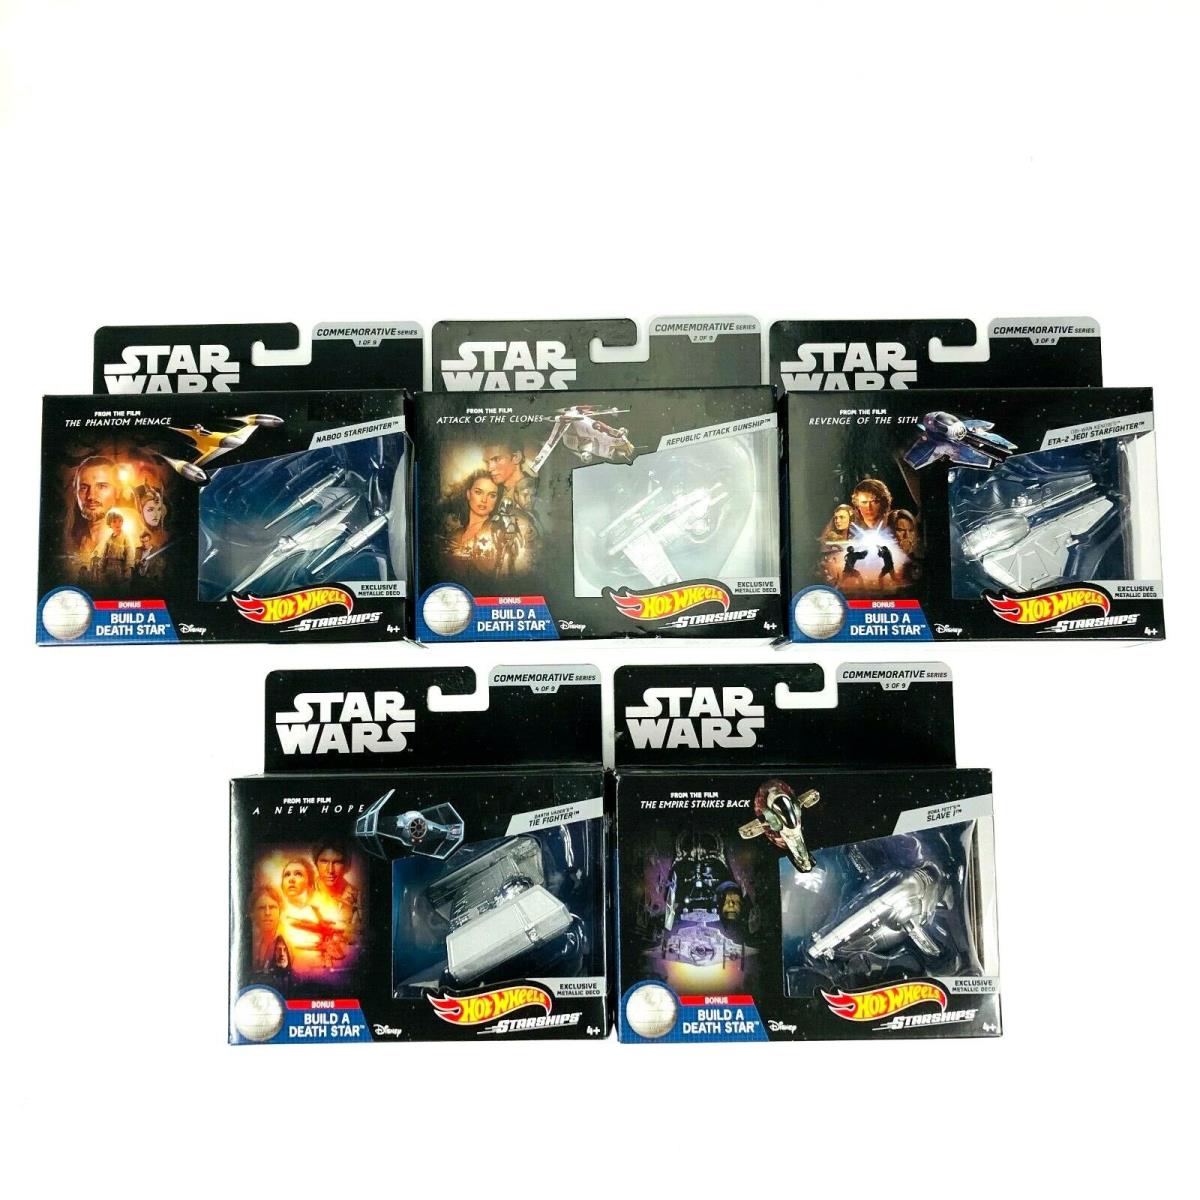 Hot Wheels Starships Star Wars Commemorative Series 1-5 In Packaging - Silver